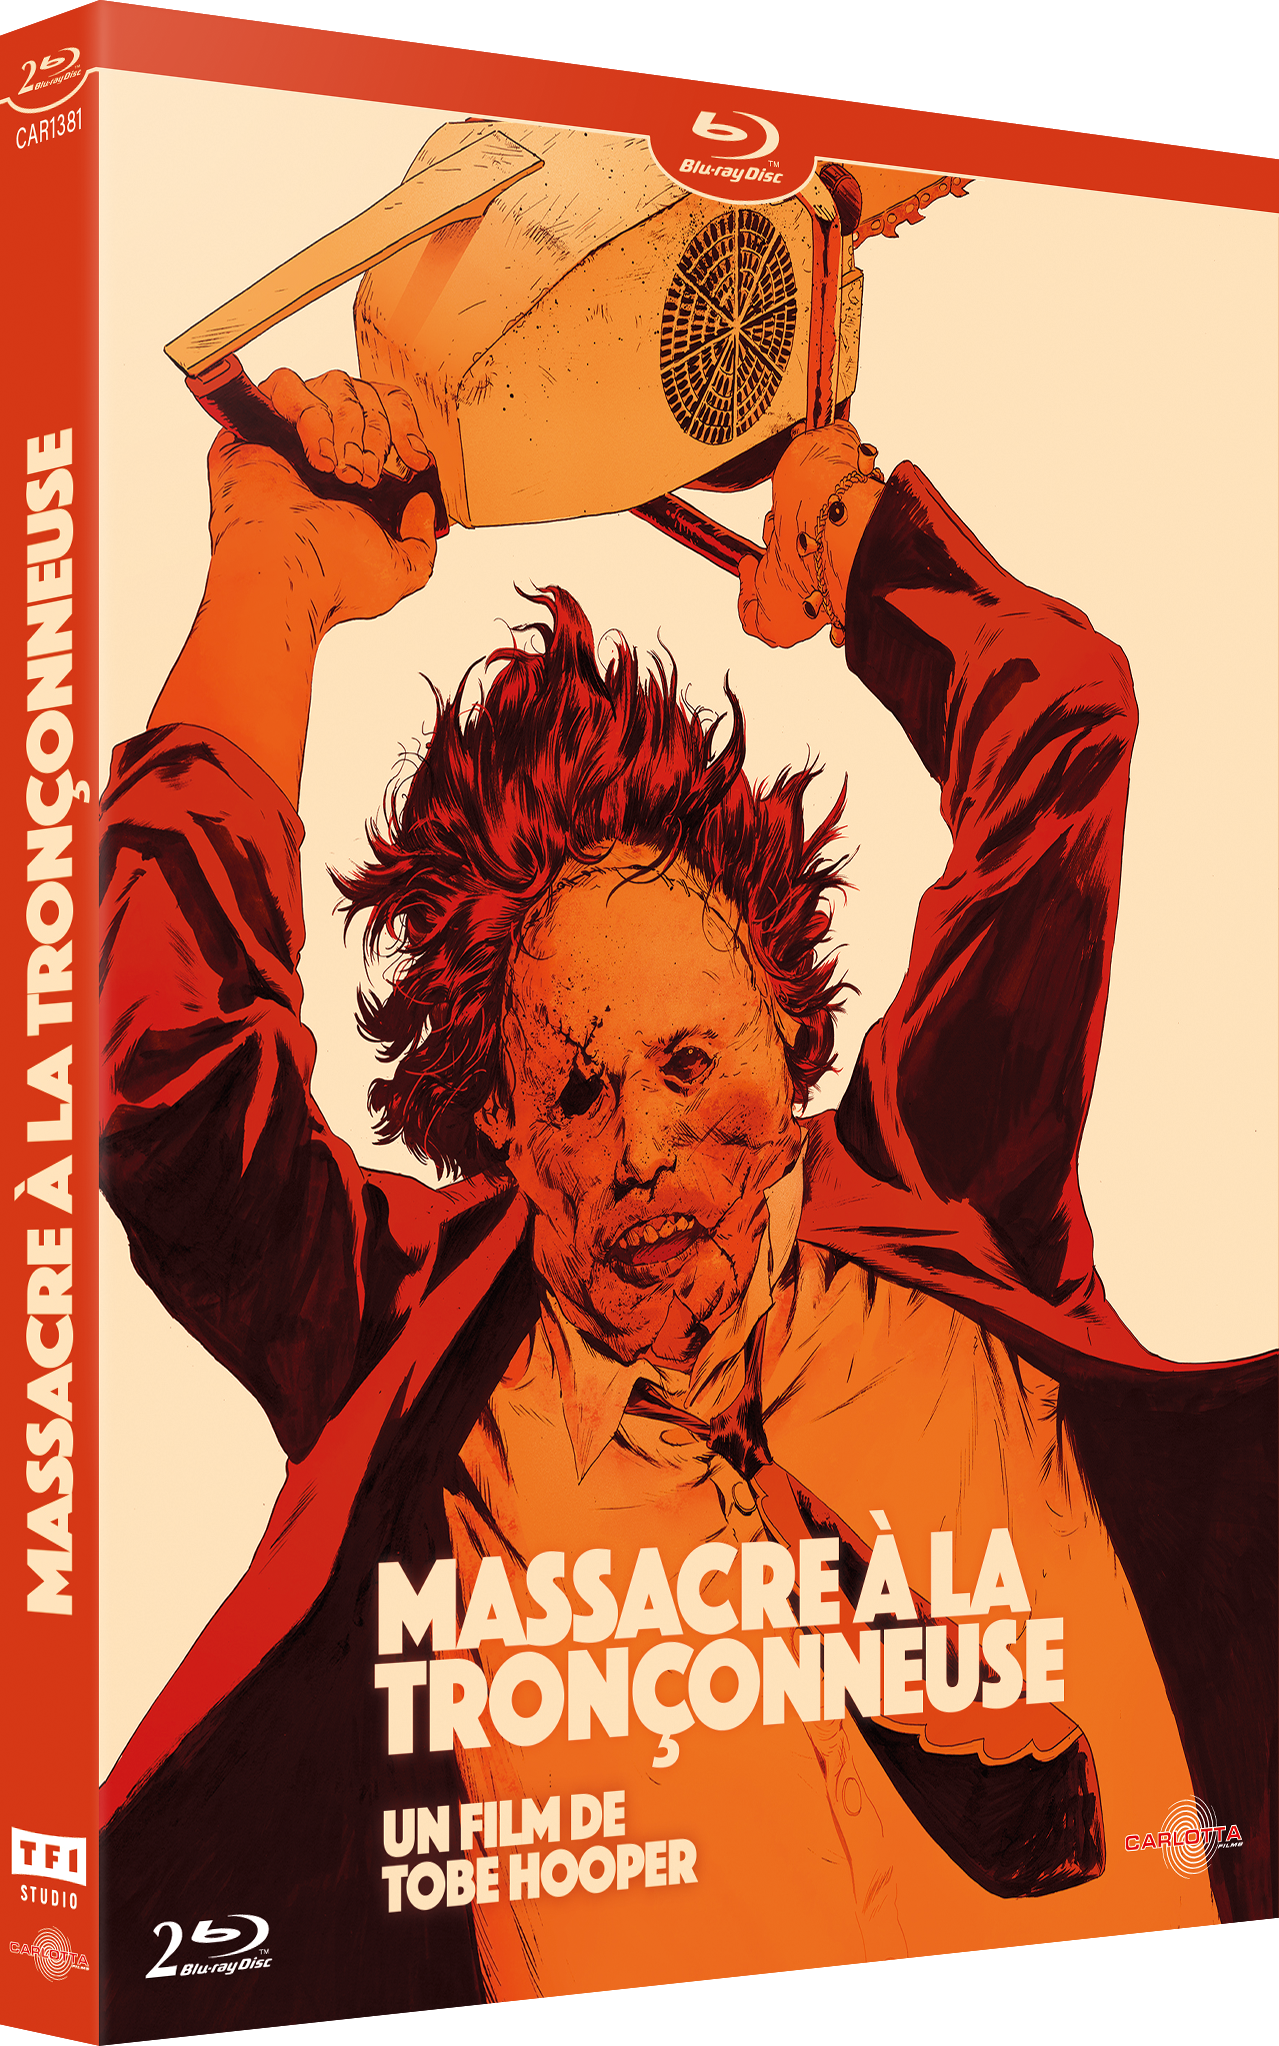 The Texas Chainsaw Massacre by Tobe Hooper